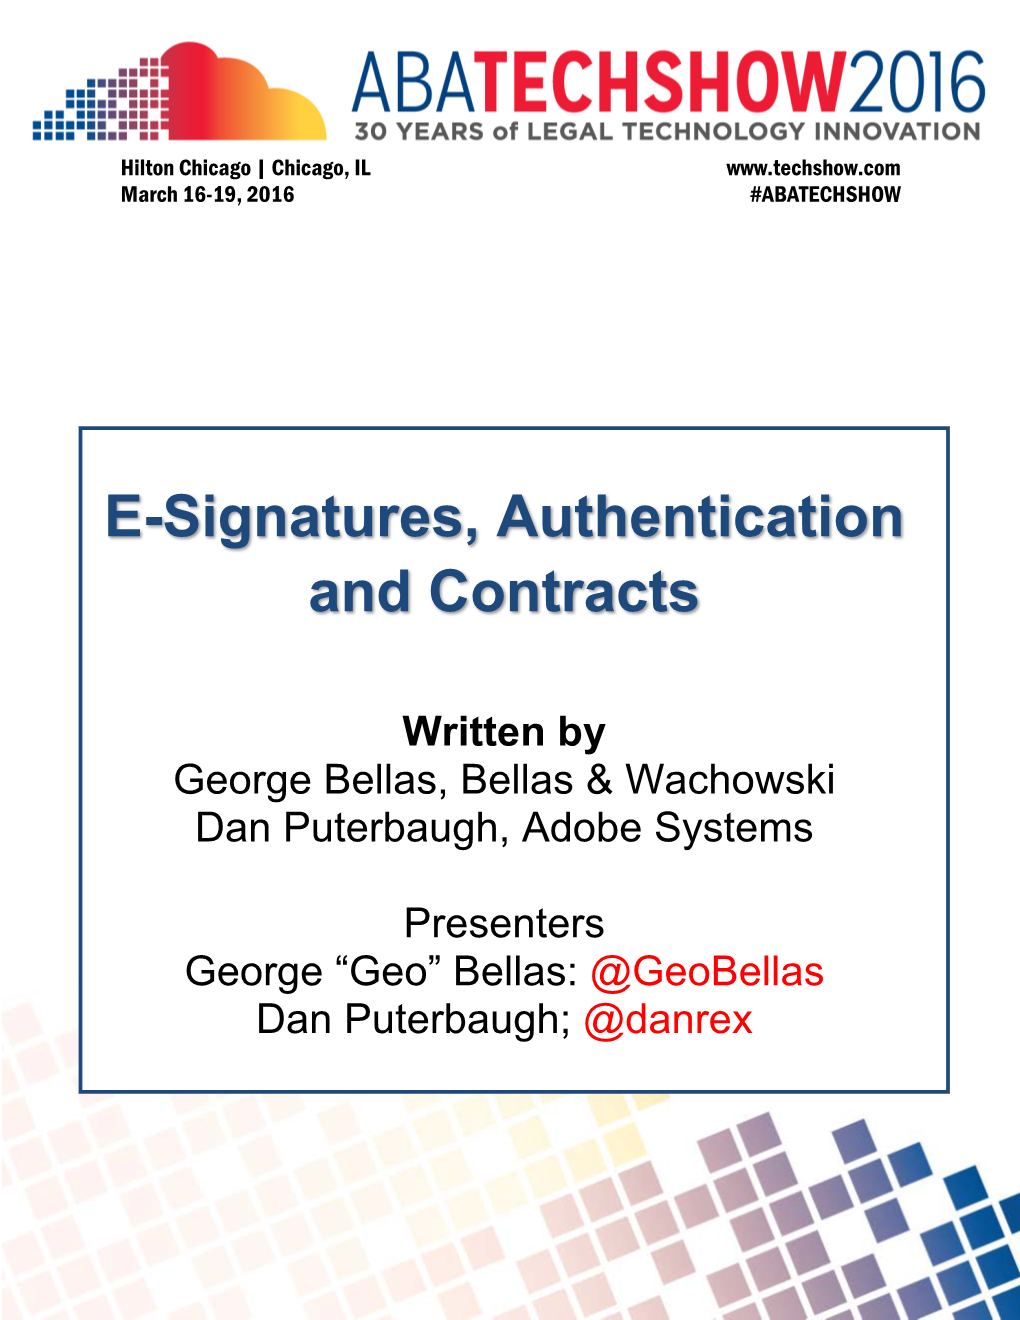 E-Signatures, Authentication and Contracts